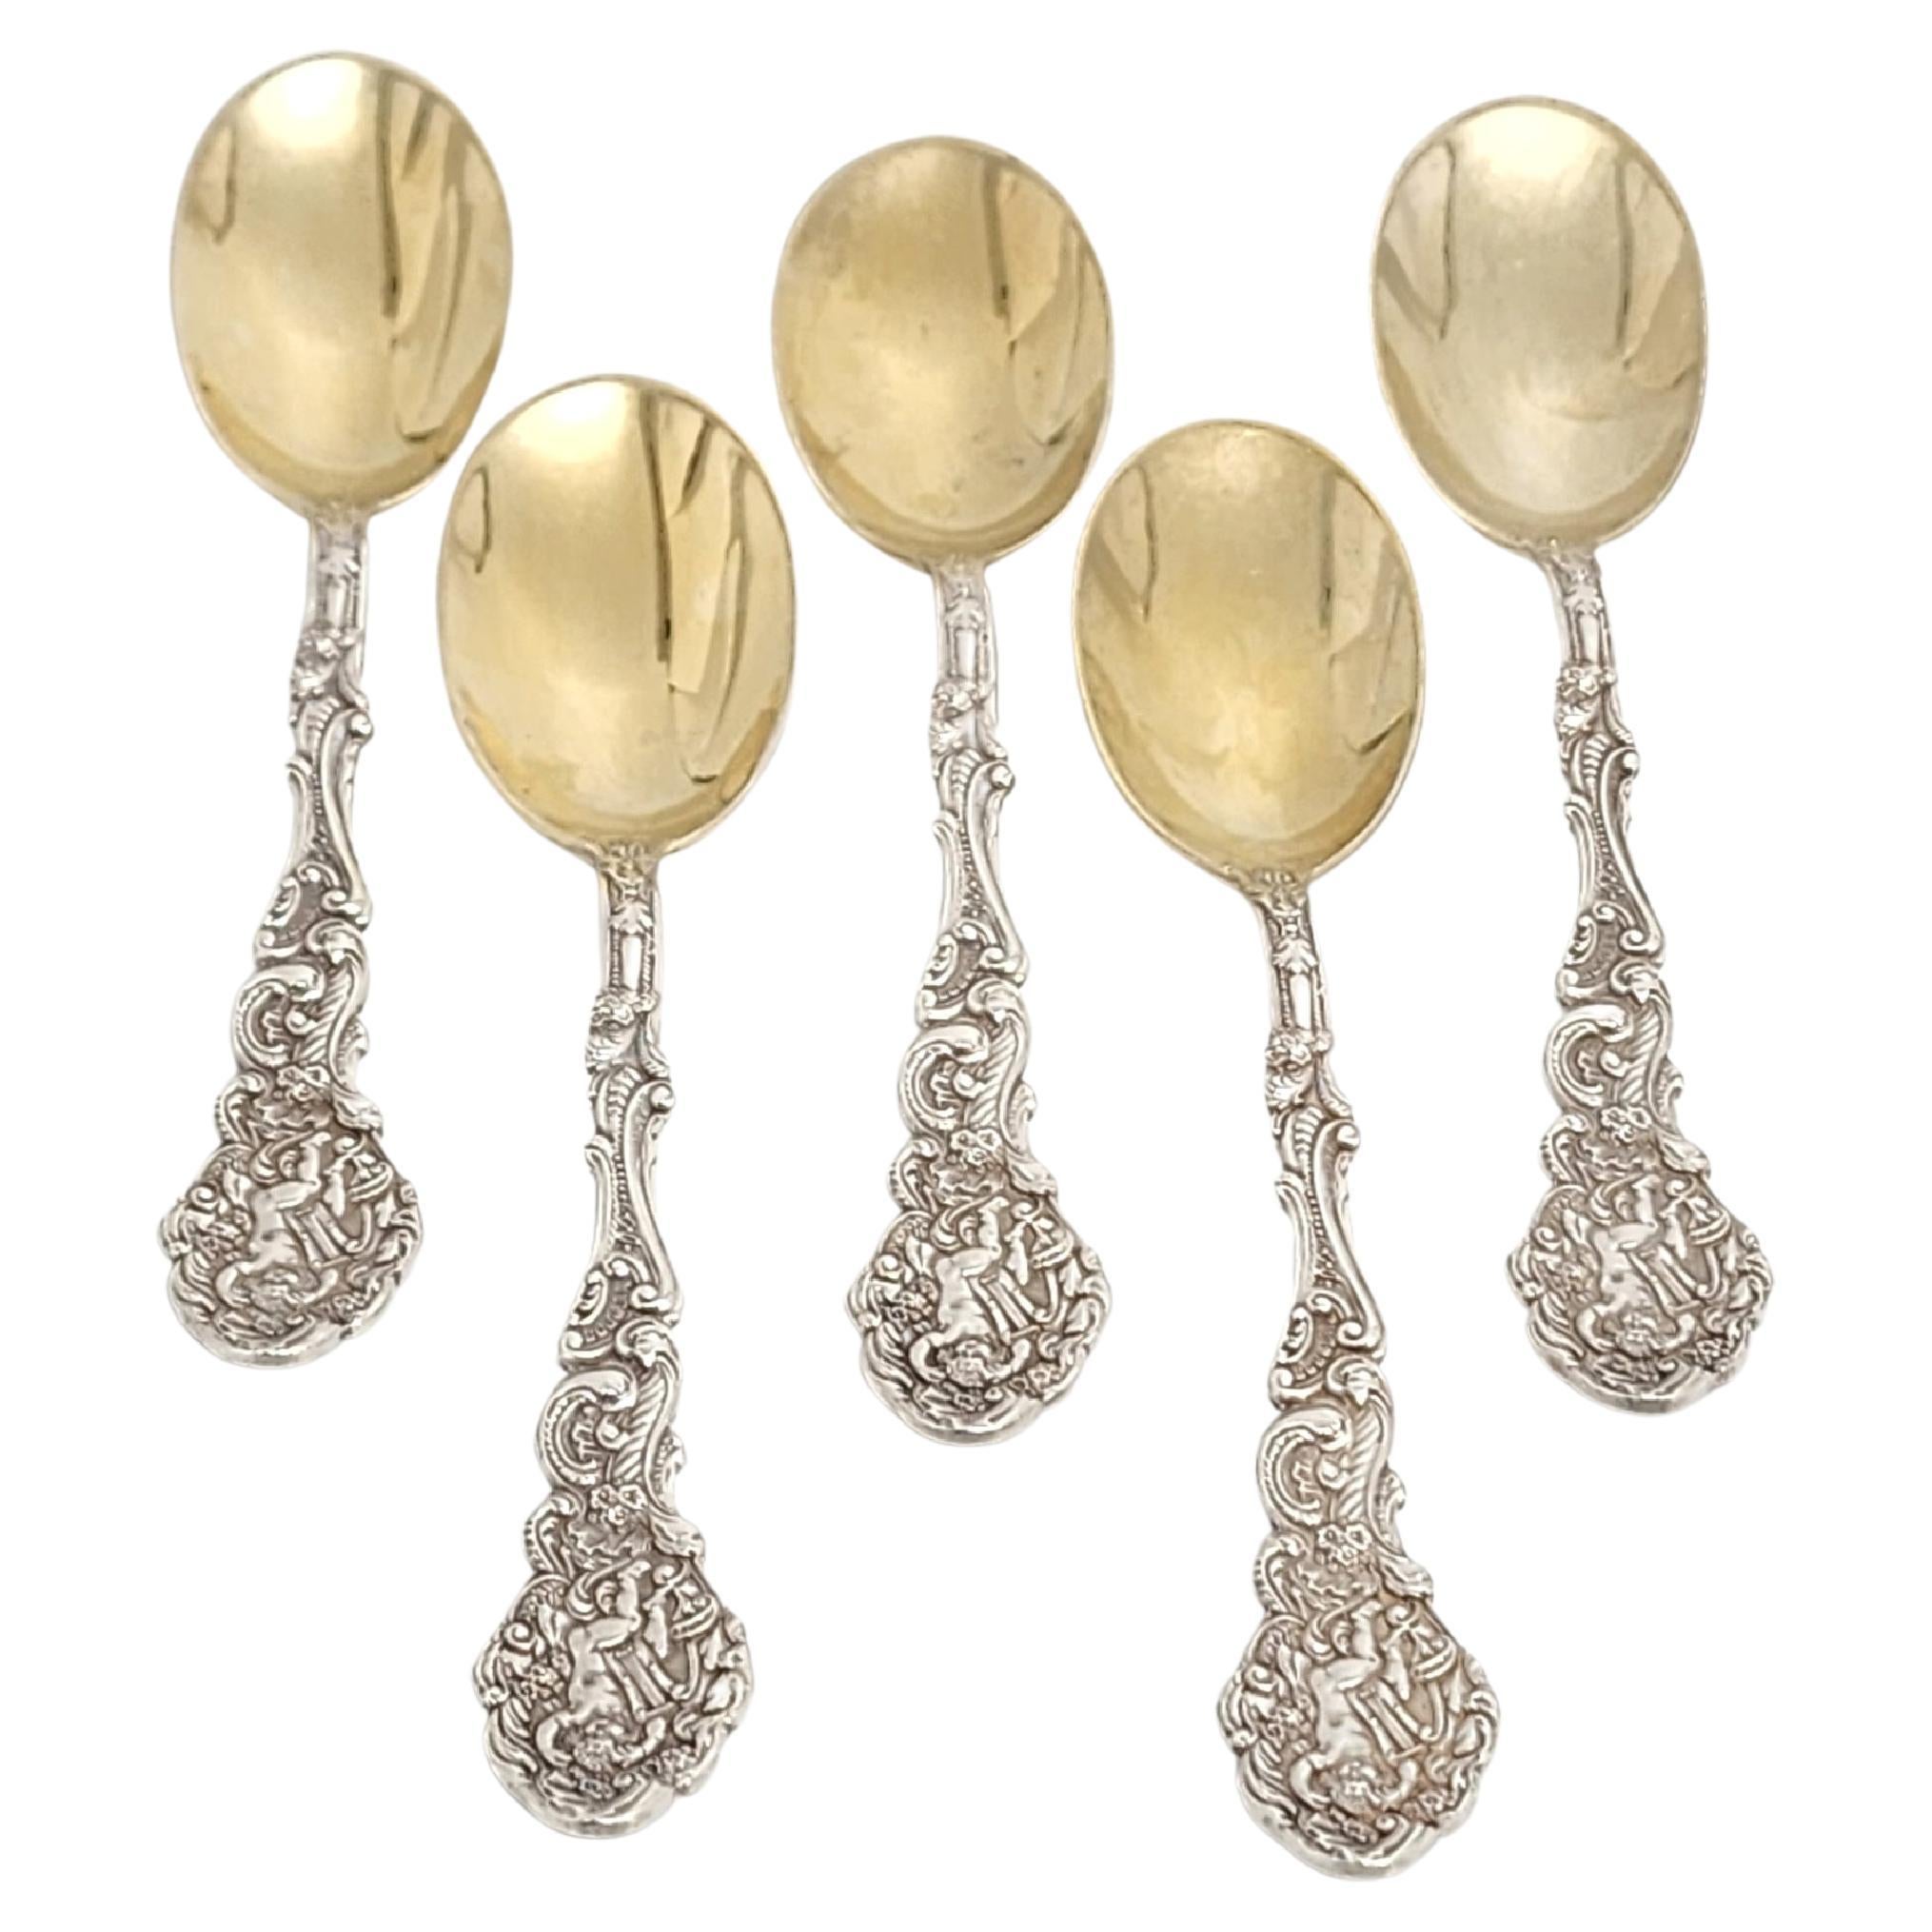 Set of 5 Gorham Versailles Sterling Silver Gold Wash Bowl Small Ice Cream Spoons